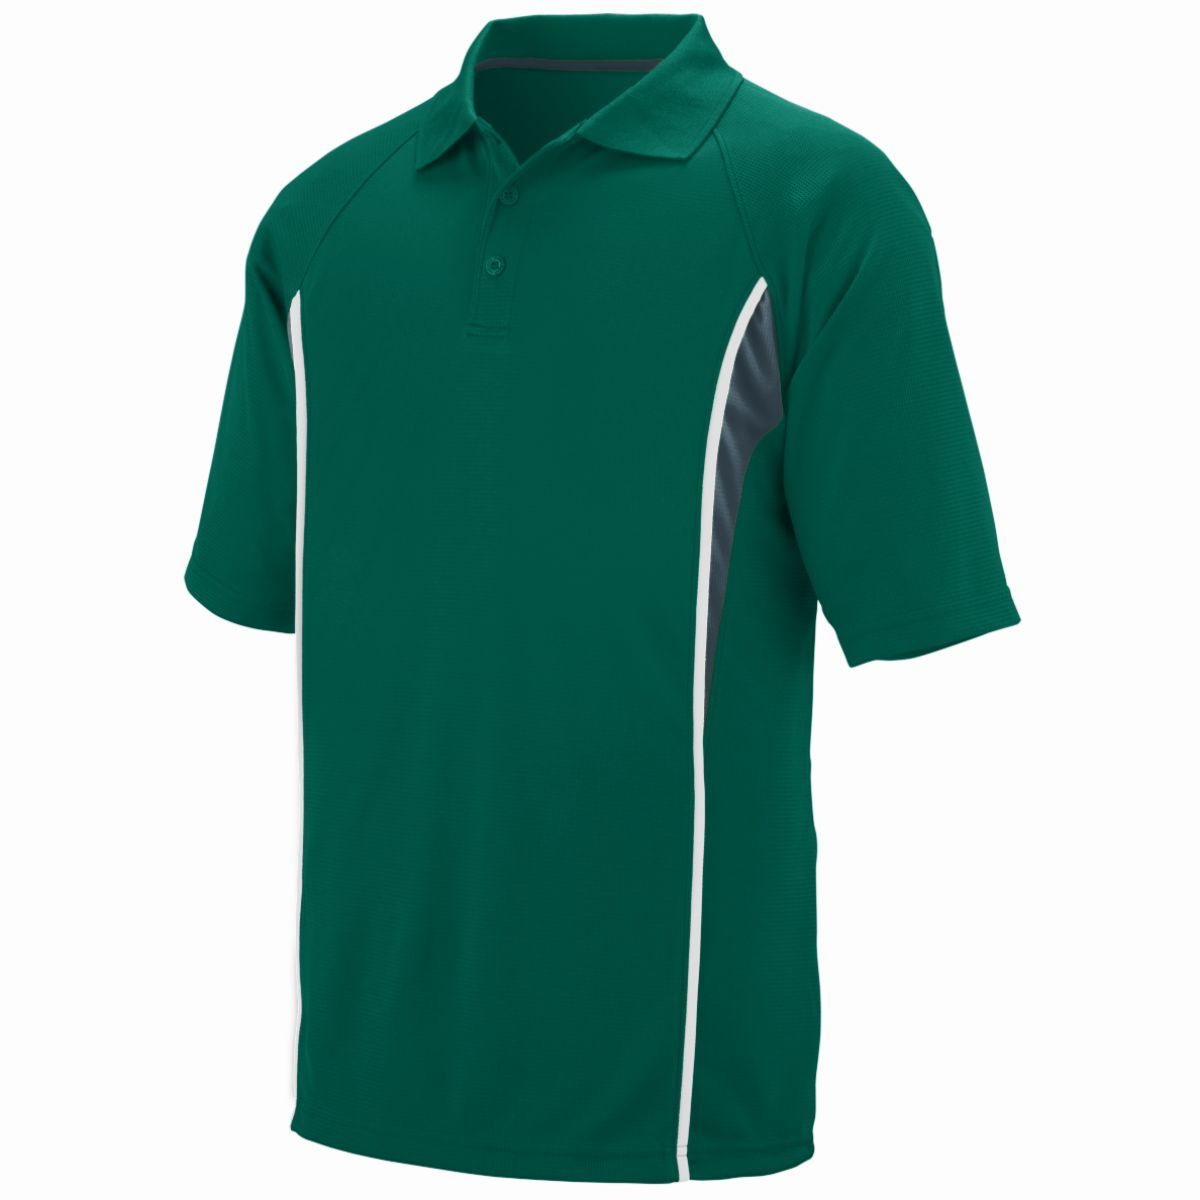 Augusta Sportswear Rival Polo in Dark Green/Slate/White  -Part of the Adult, Adult-Polos, Polos, Augusta-Products, Shirts product lines at KanaleyCreations.com